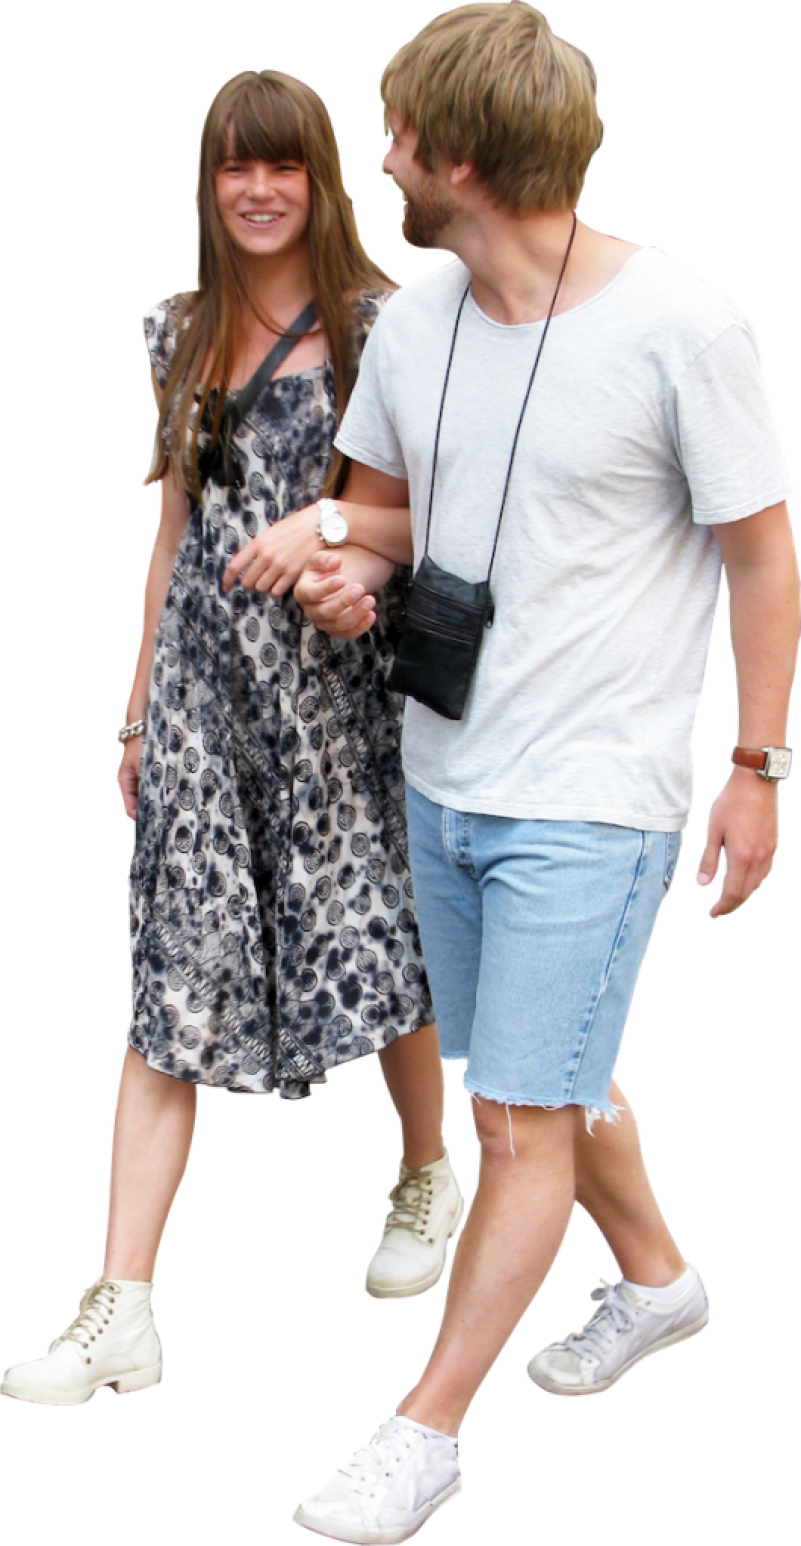 Casual Stroll Couple Summer Outfits PNG